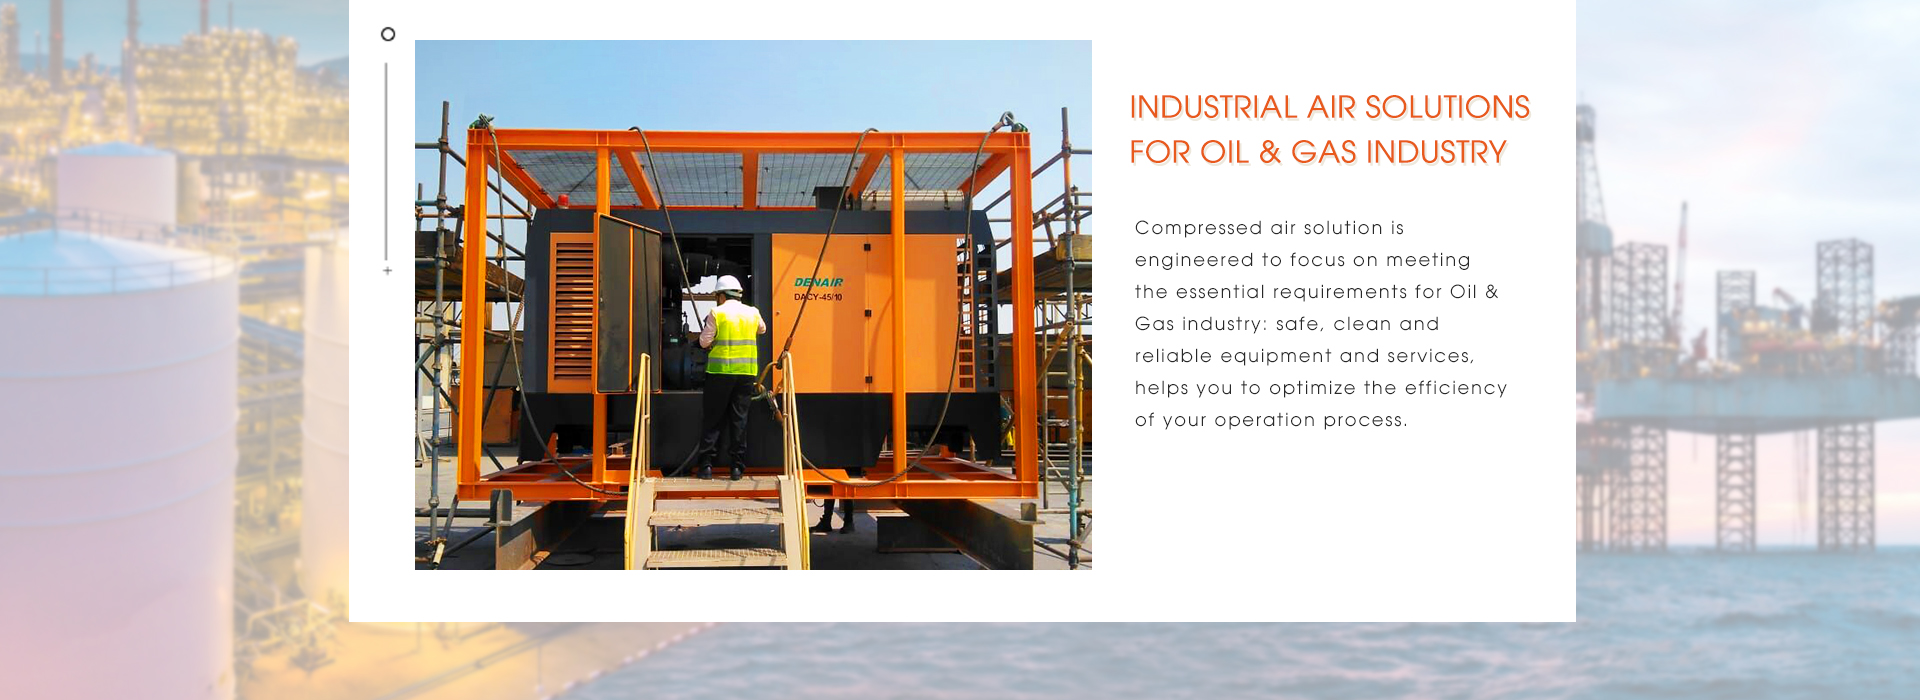 Industrial Air Solutions for Oil & Gas Industry